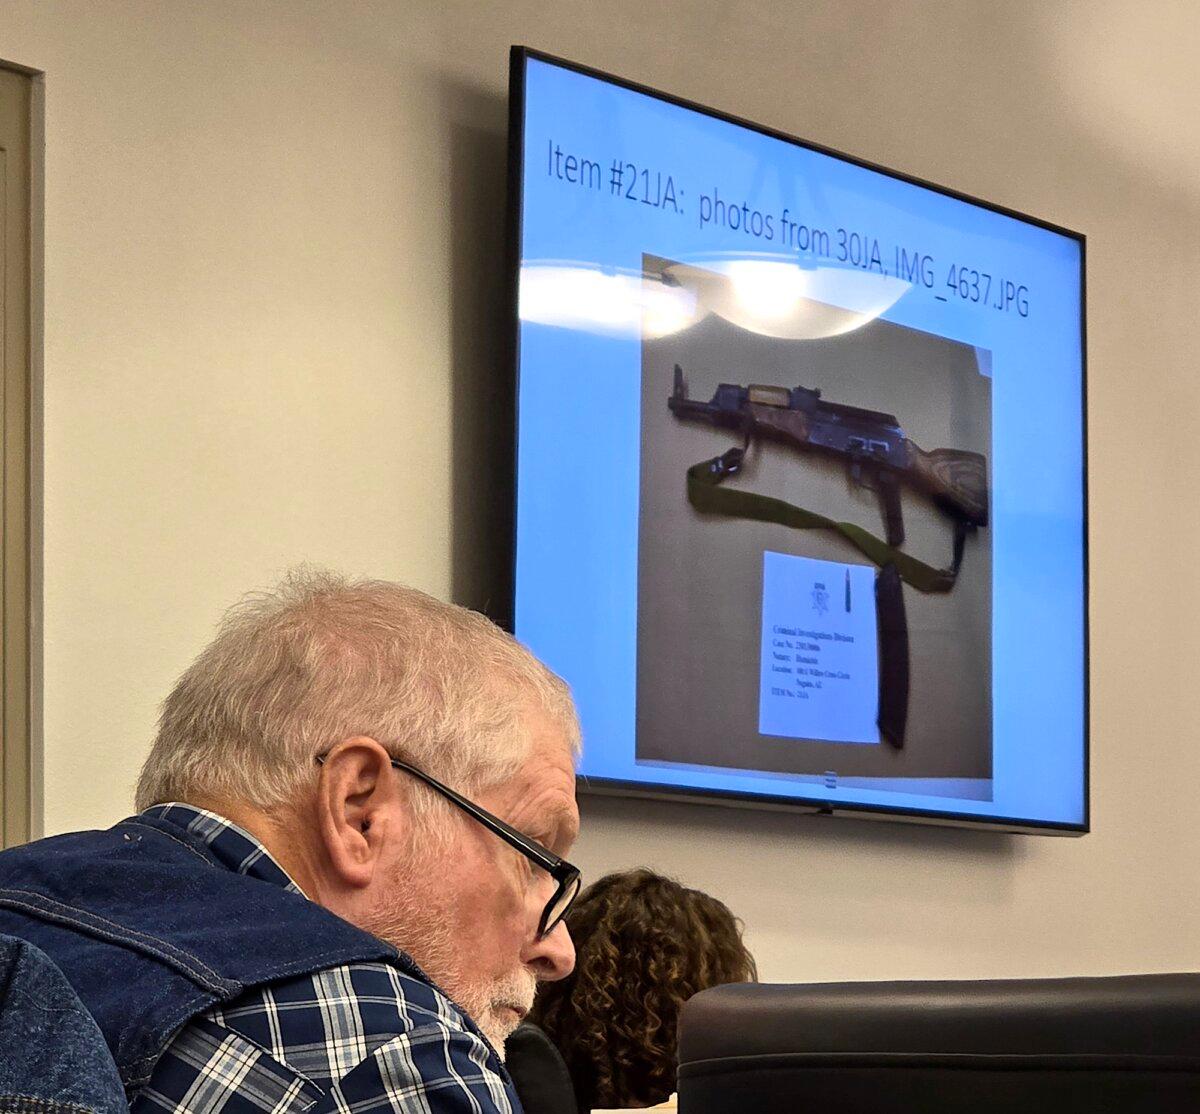 George Alan Kelly, 75, is accused of killing an illegal immigrant with a semi-automatic rifle. A photograph of the AK-47 rifle he allegedly used is shown on a screen as he listens to testimony during his trial in Nogales, Ariz., on March 28, 2024. (Allan Stein/The Epoch Times)